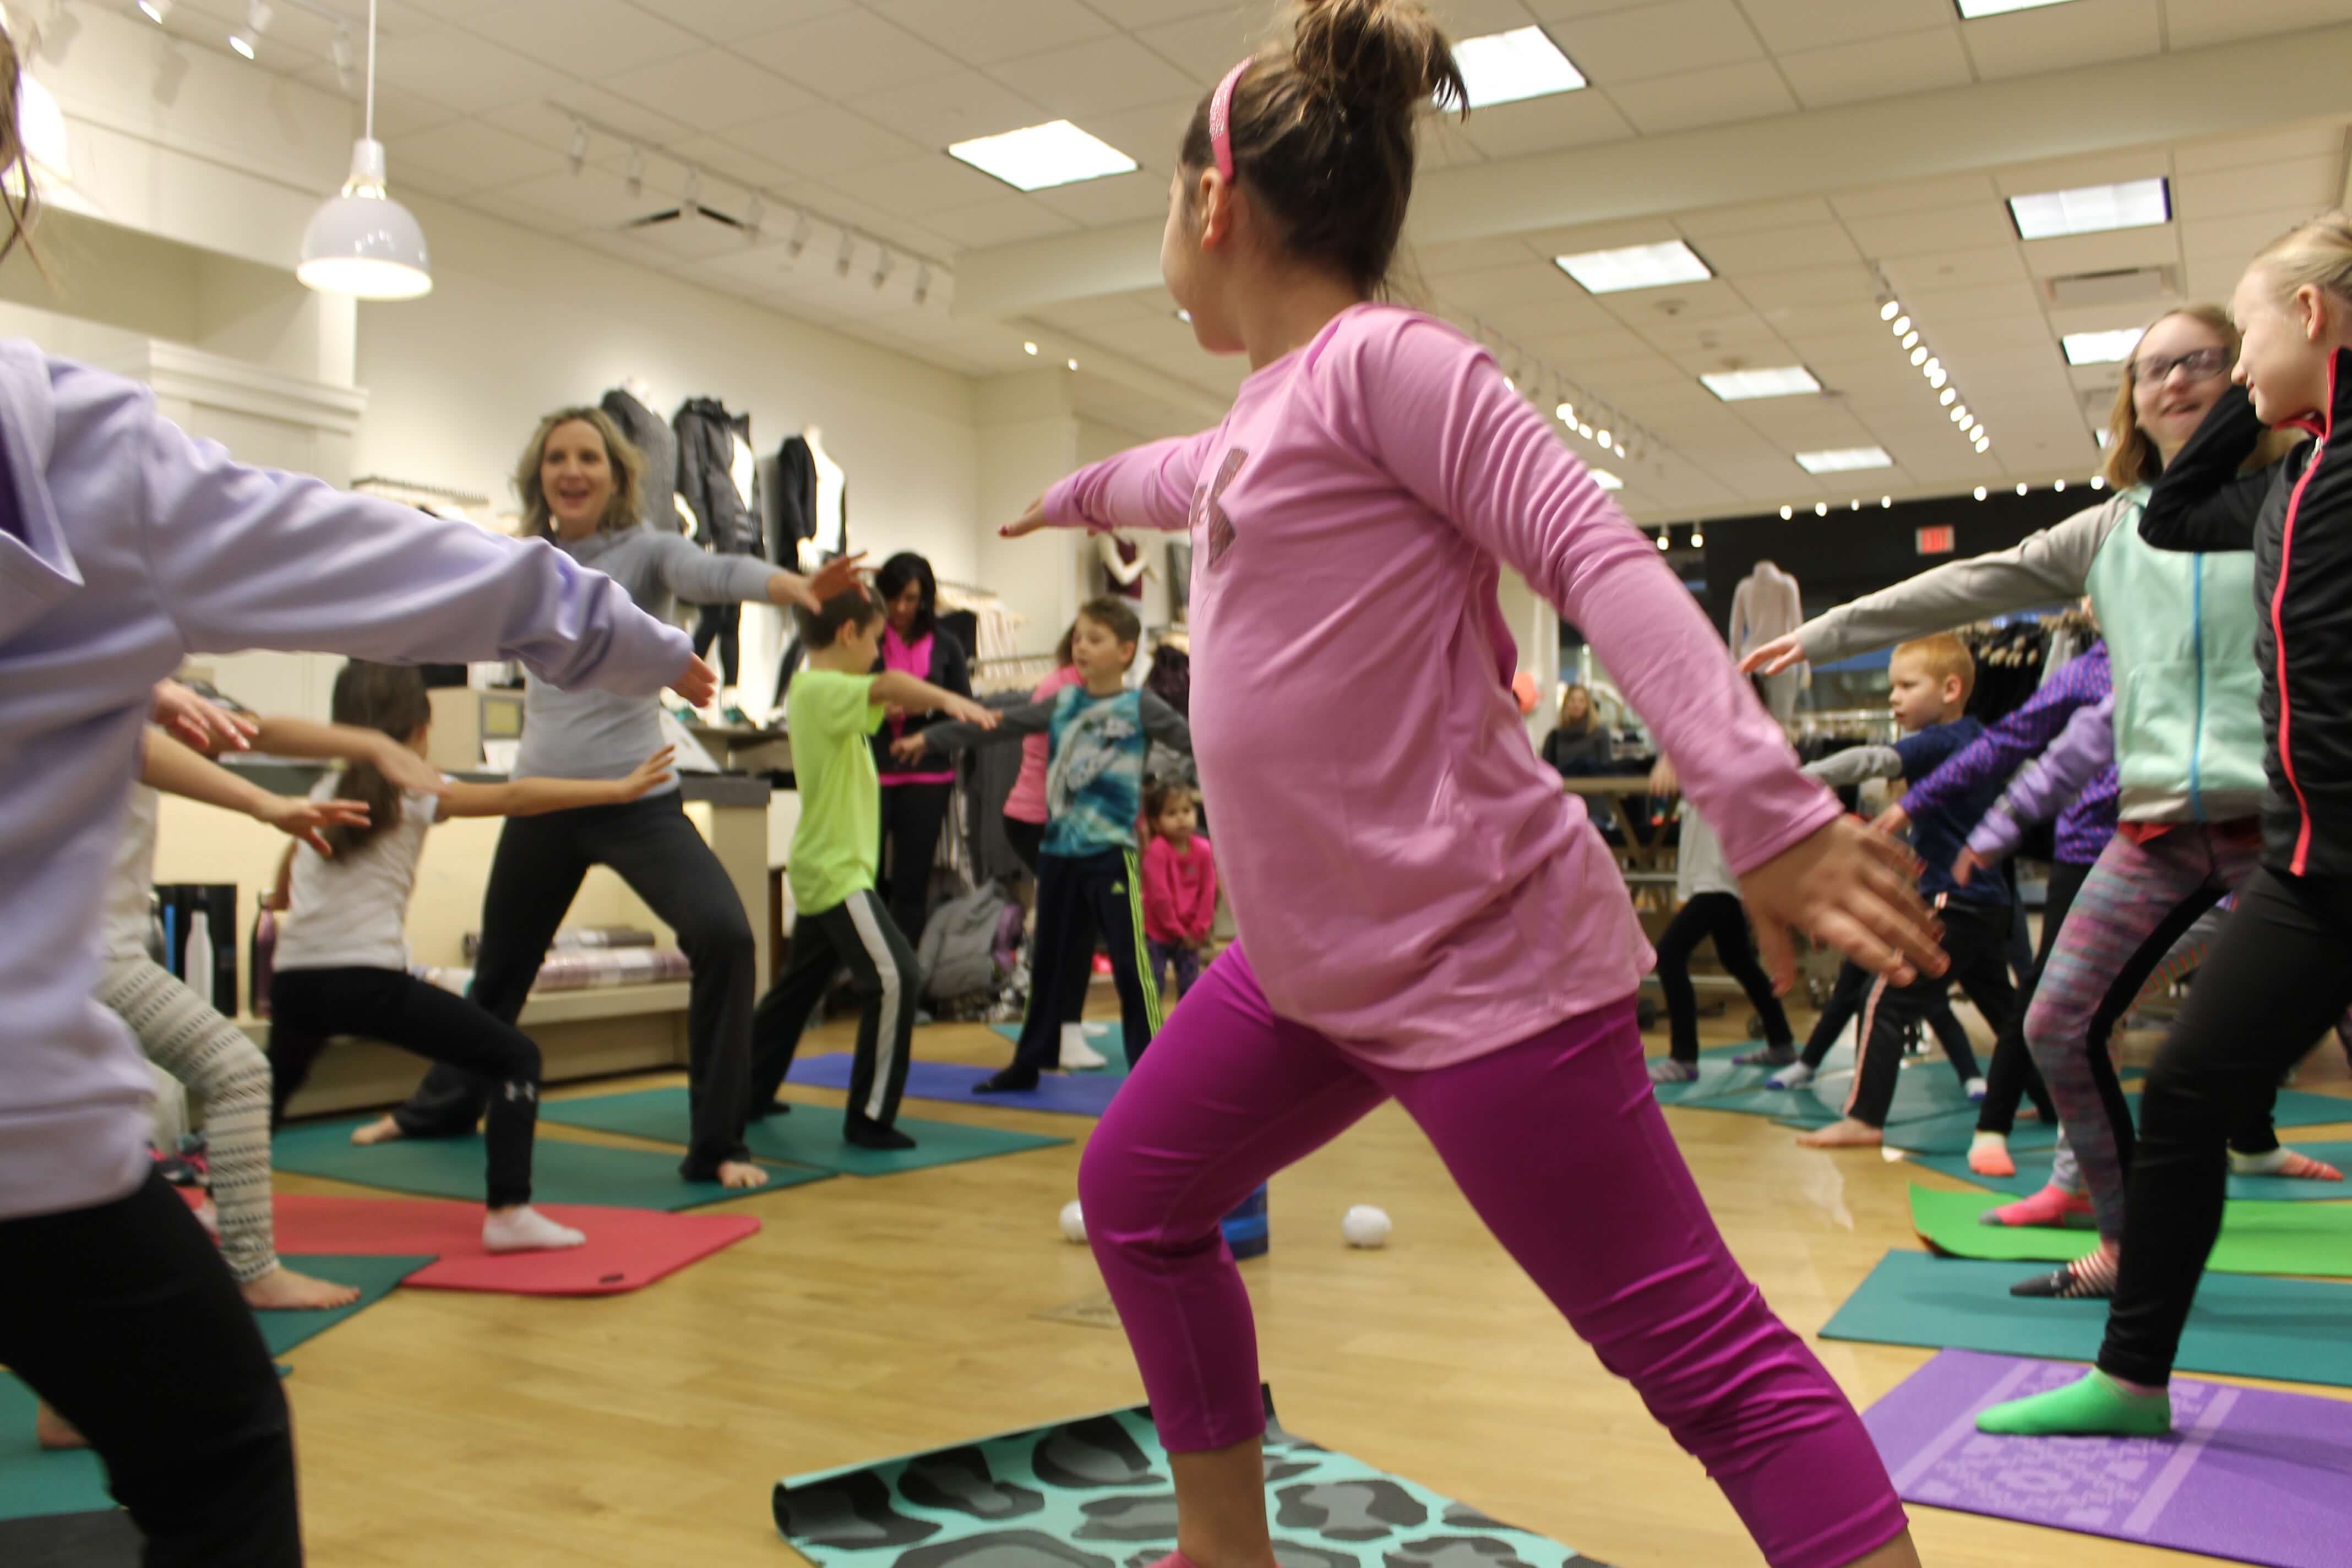 Here is a peek at our fun kids winter yoga sequence at Athleta over winter break. Sun salutations and partner poses in this class